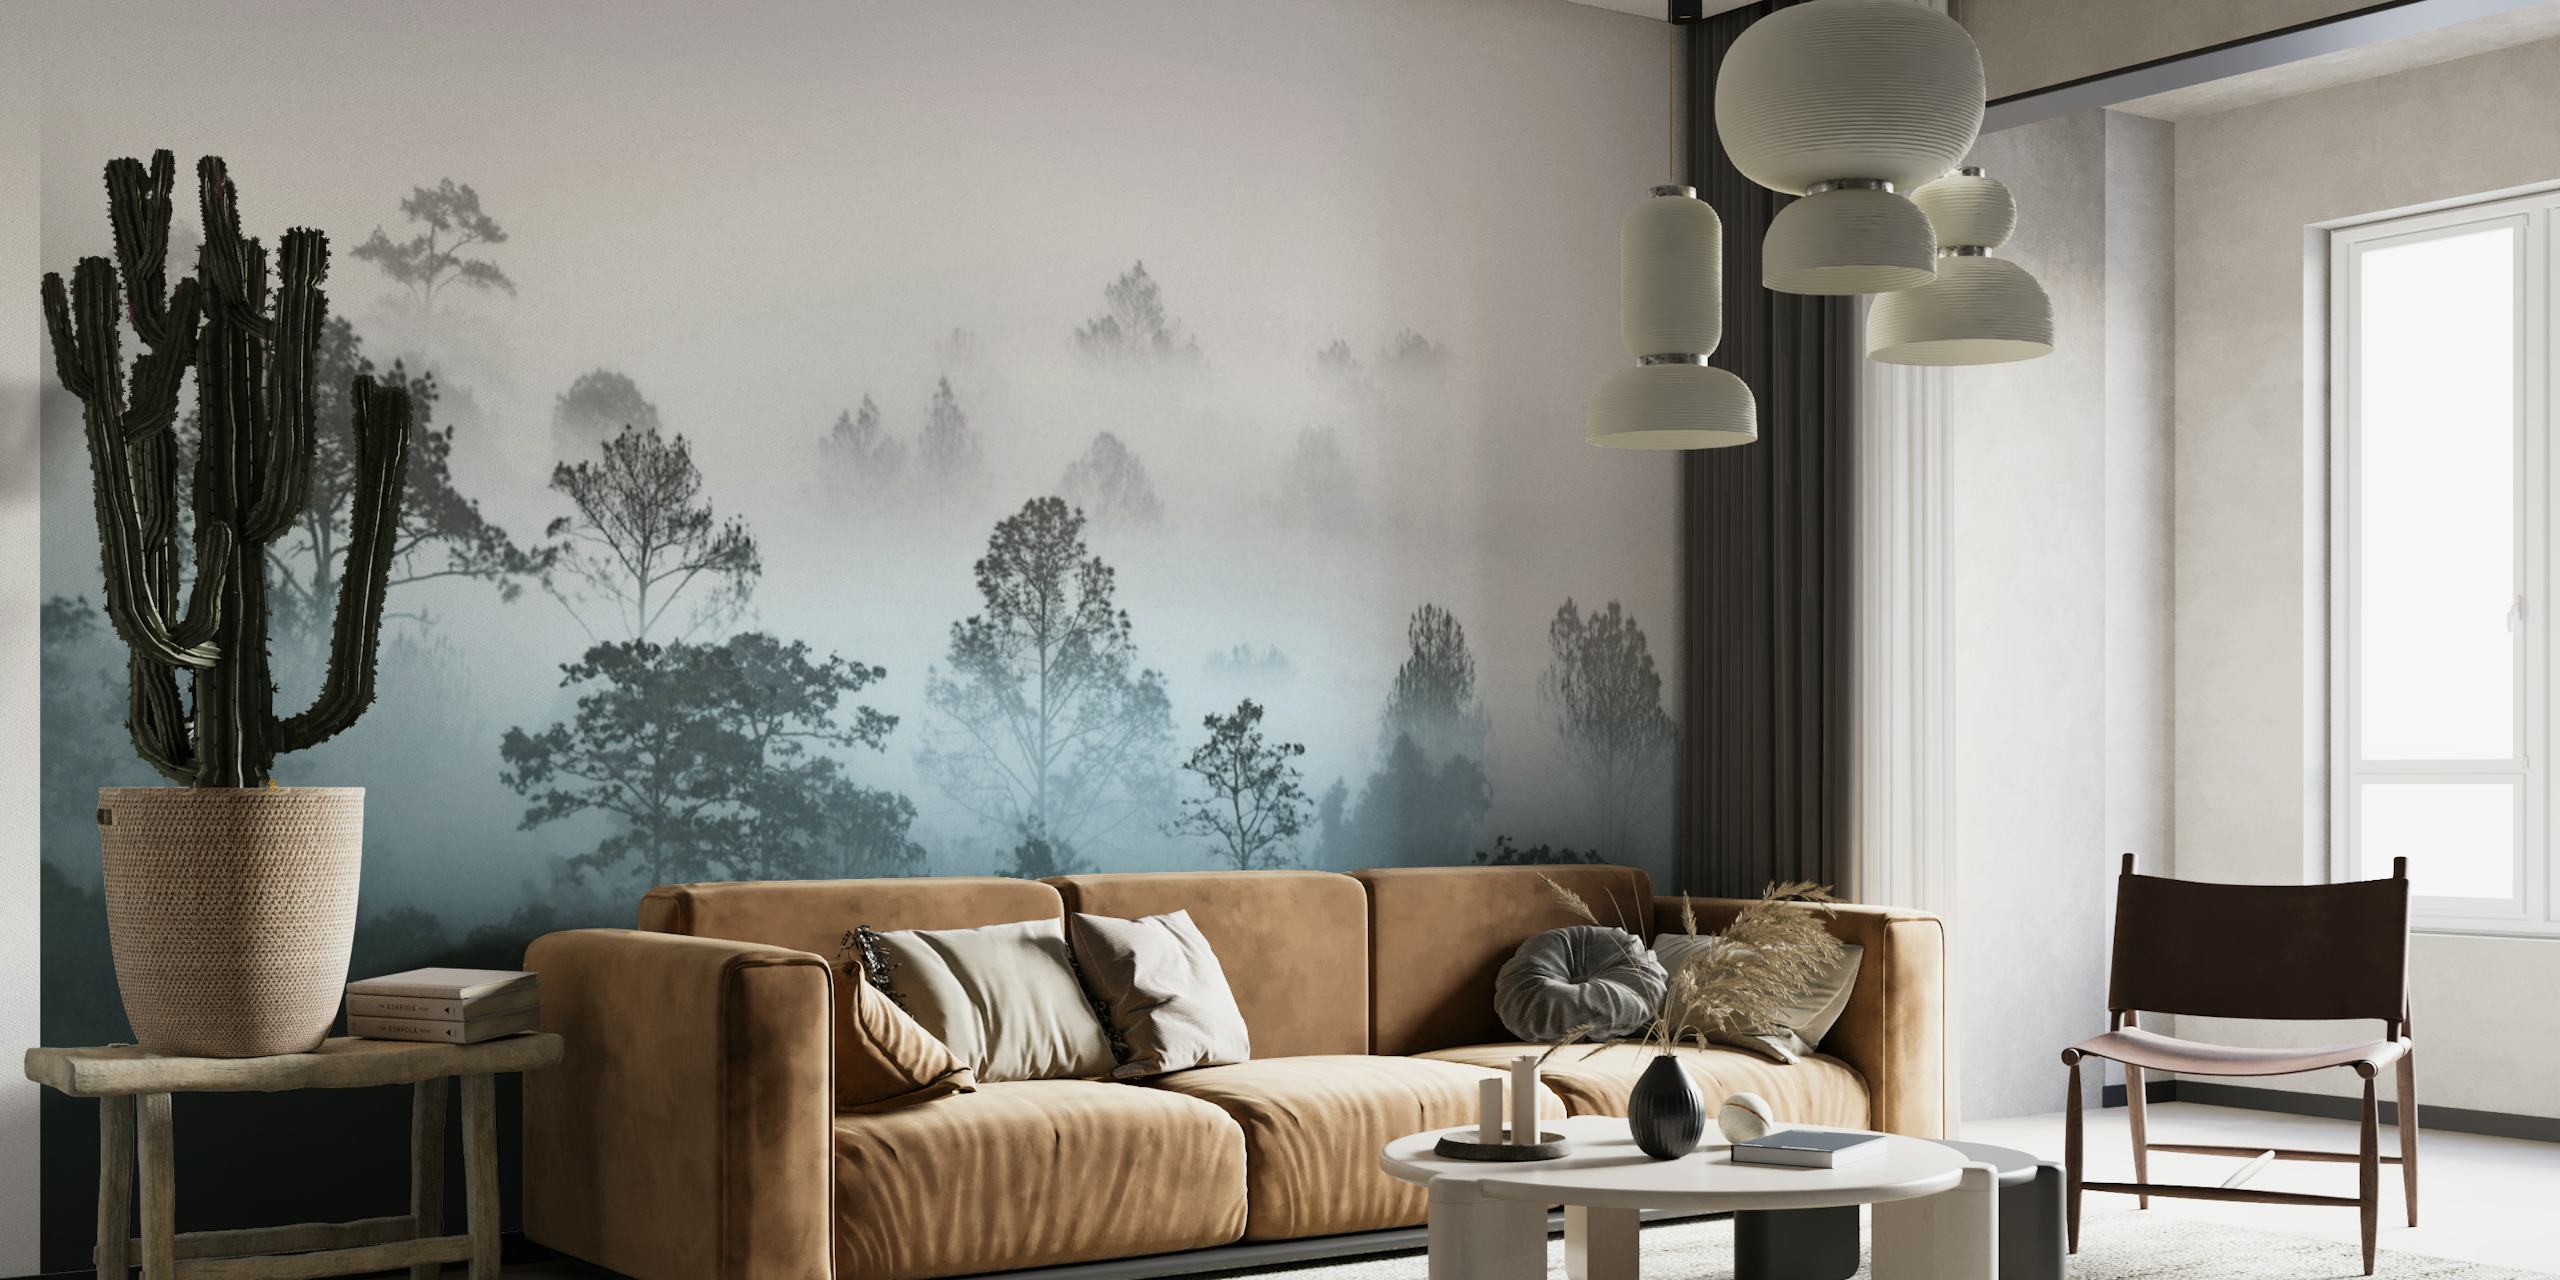 Misty forest wall mural with a gradient of fog descending through trees